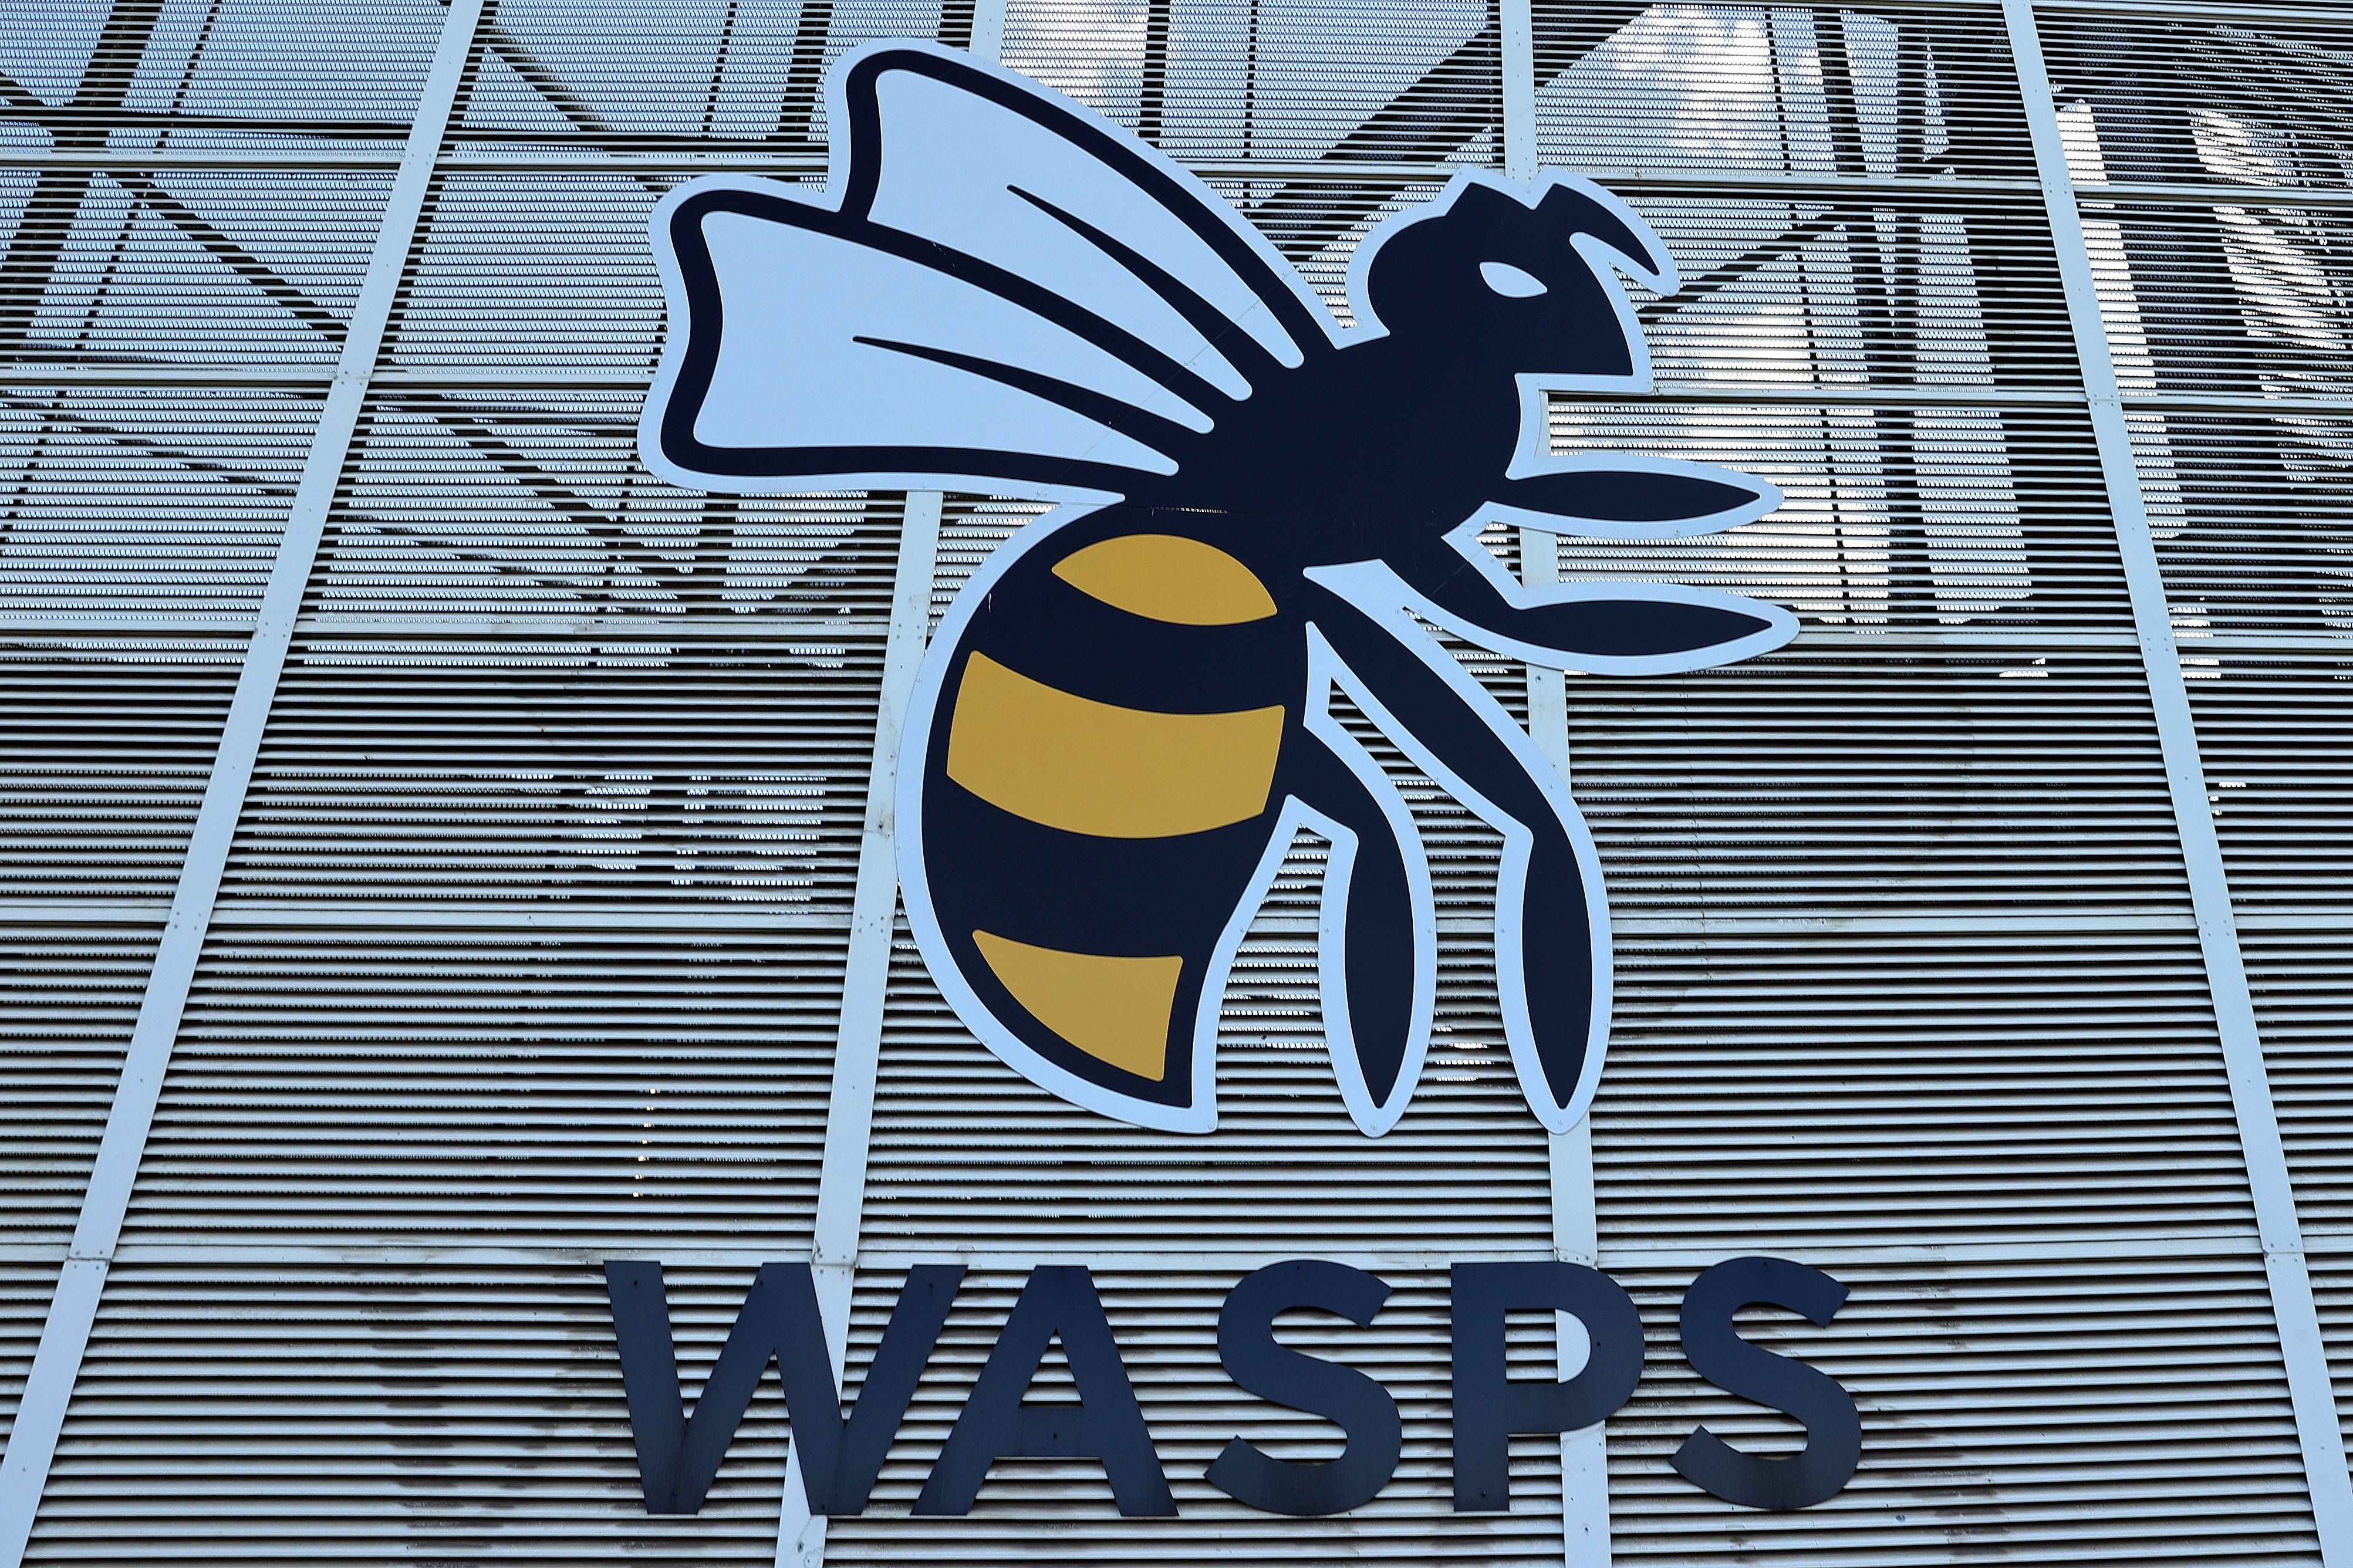 Wasps will be the second Premiership club to go into administration this season following Worcester